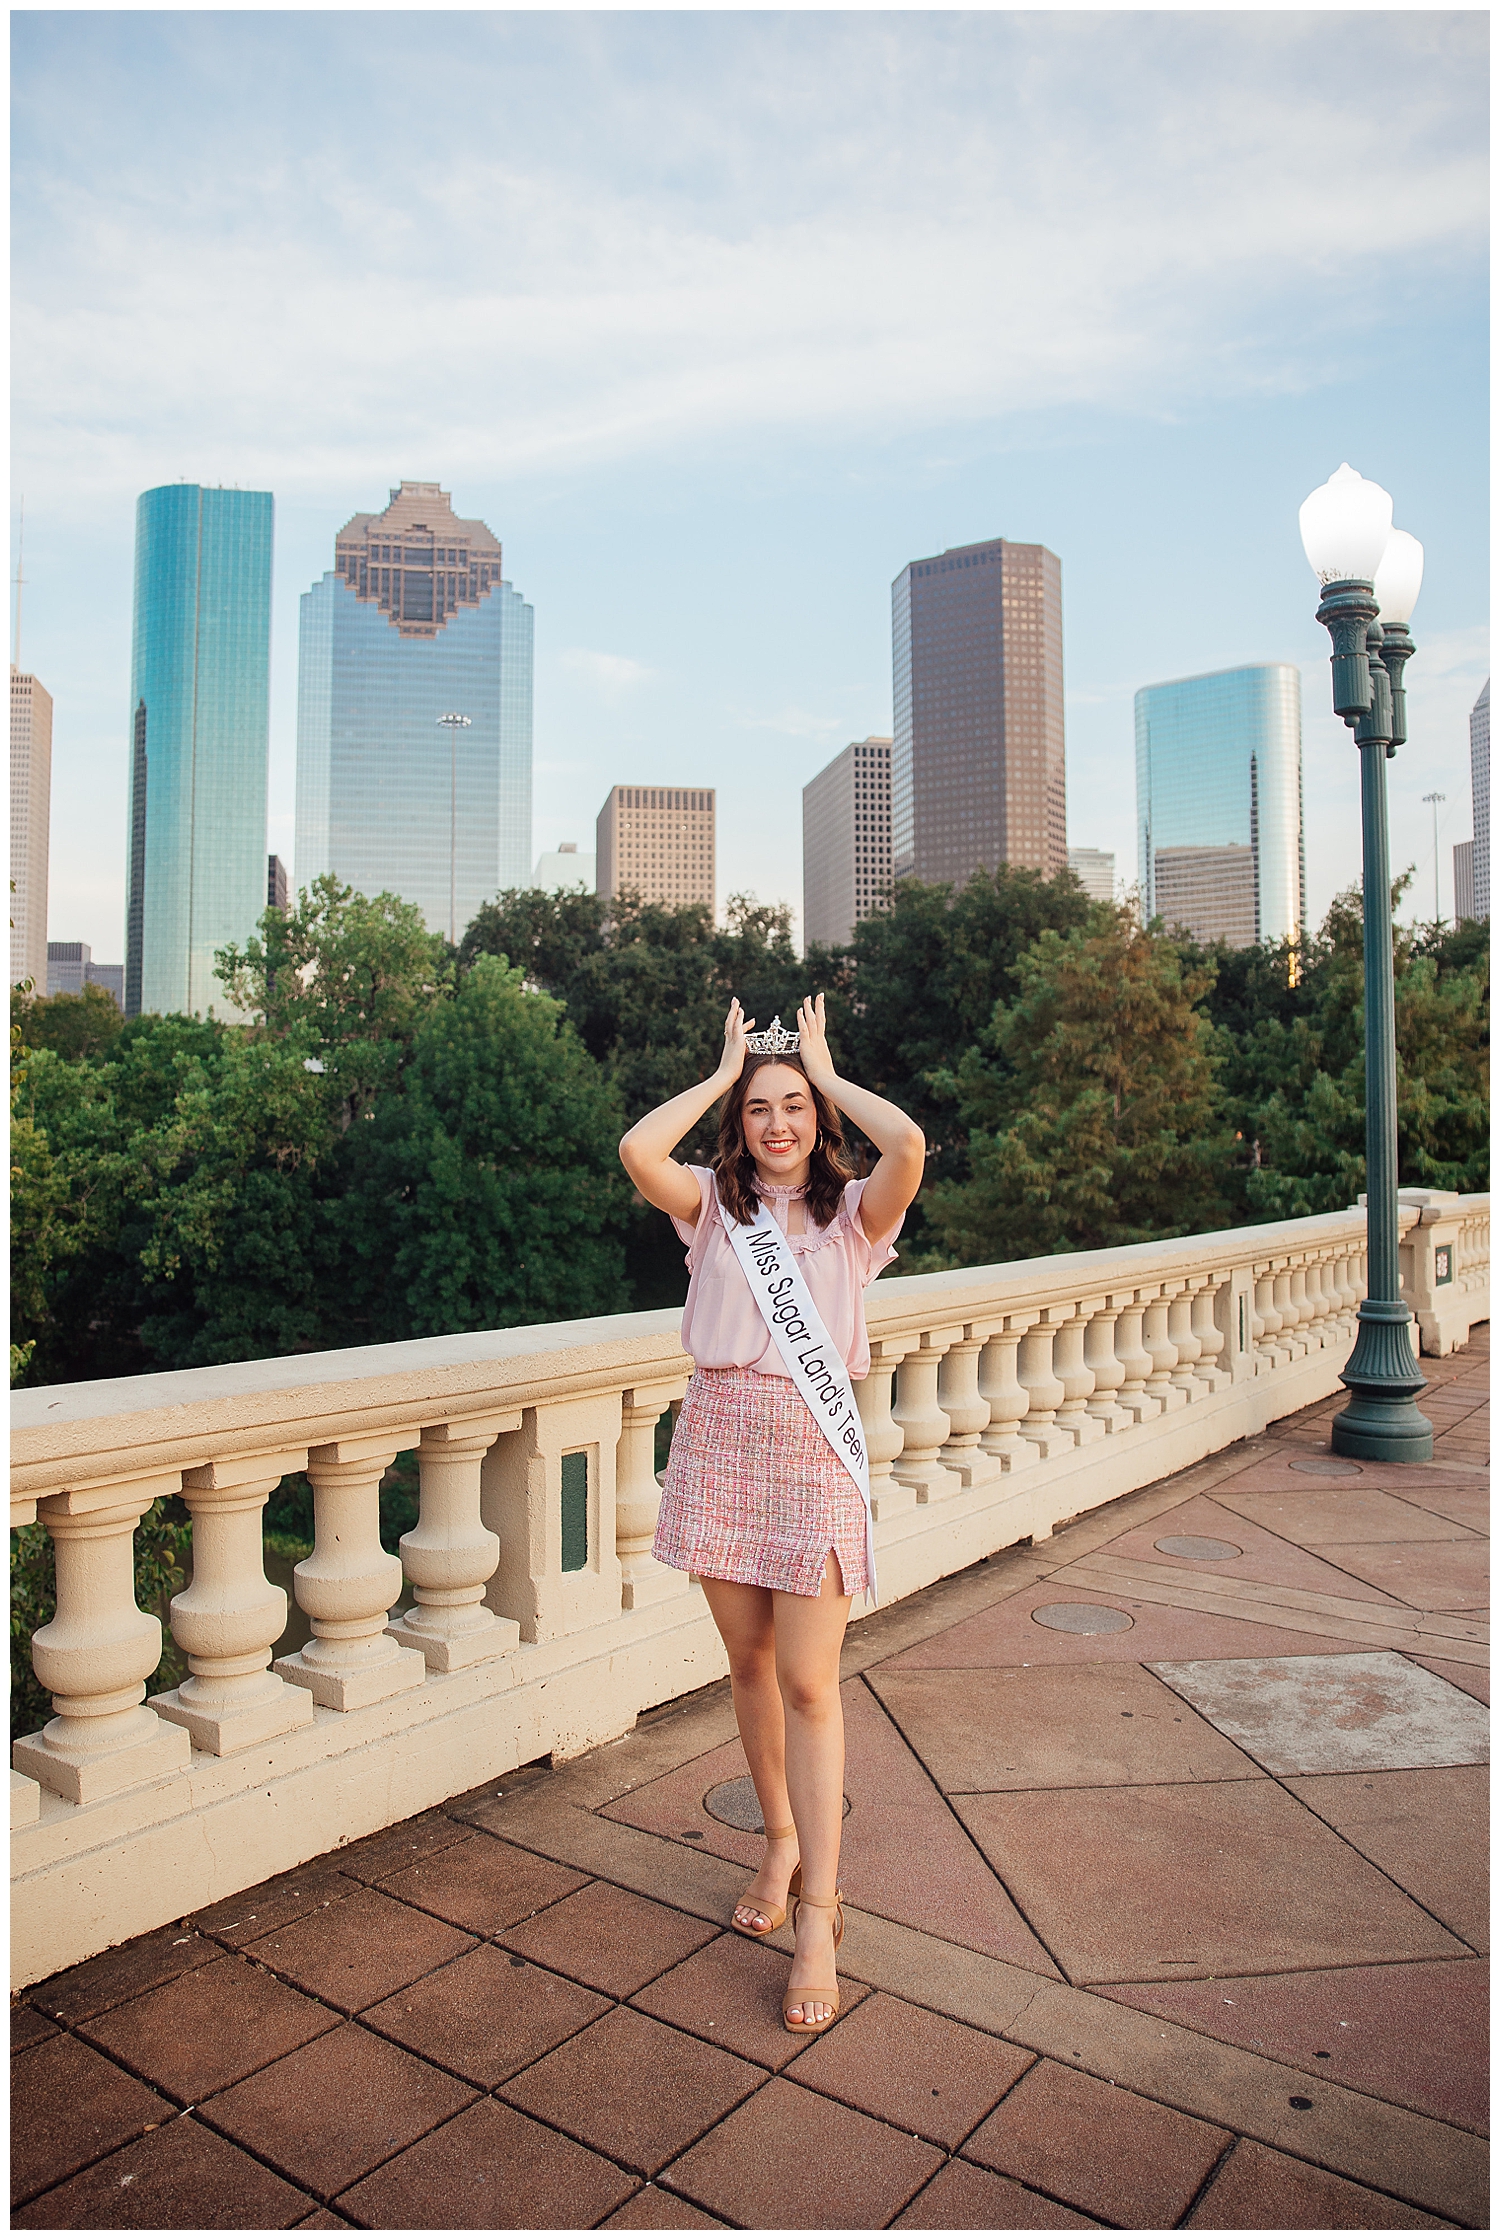 MIss Sugar Land Teen at Houston Skyline Senior Photos holding crown on head with her hands